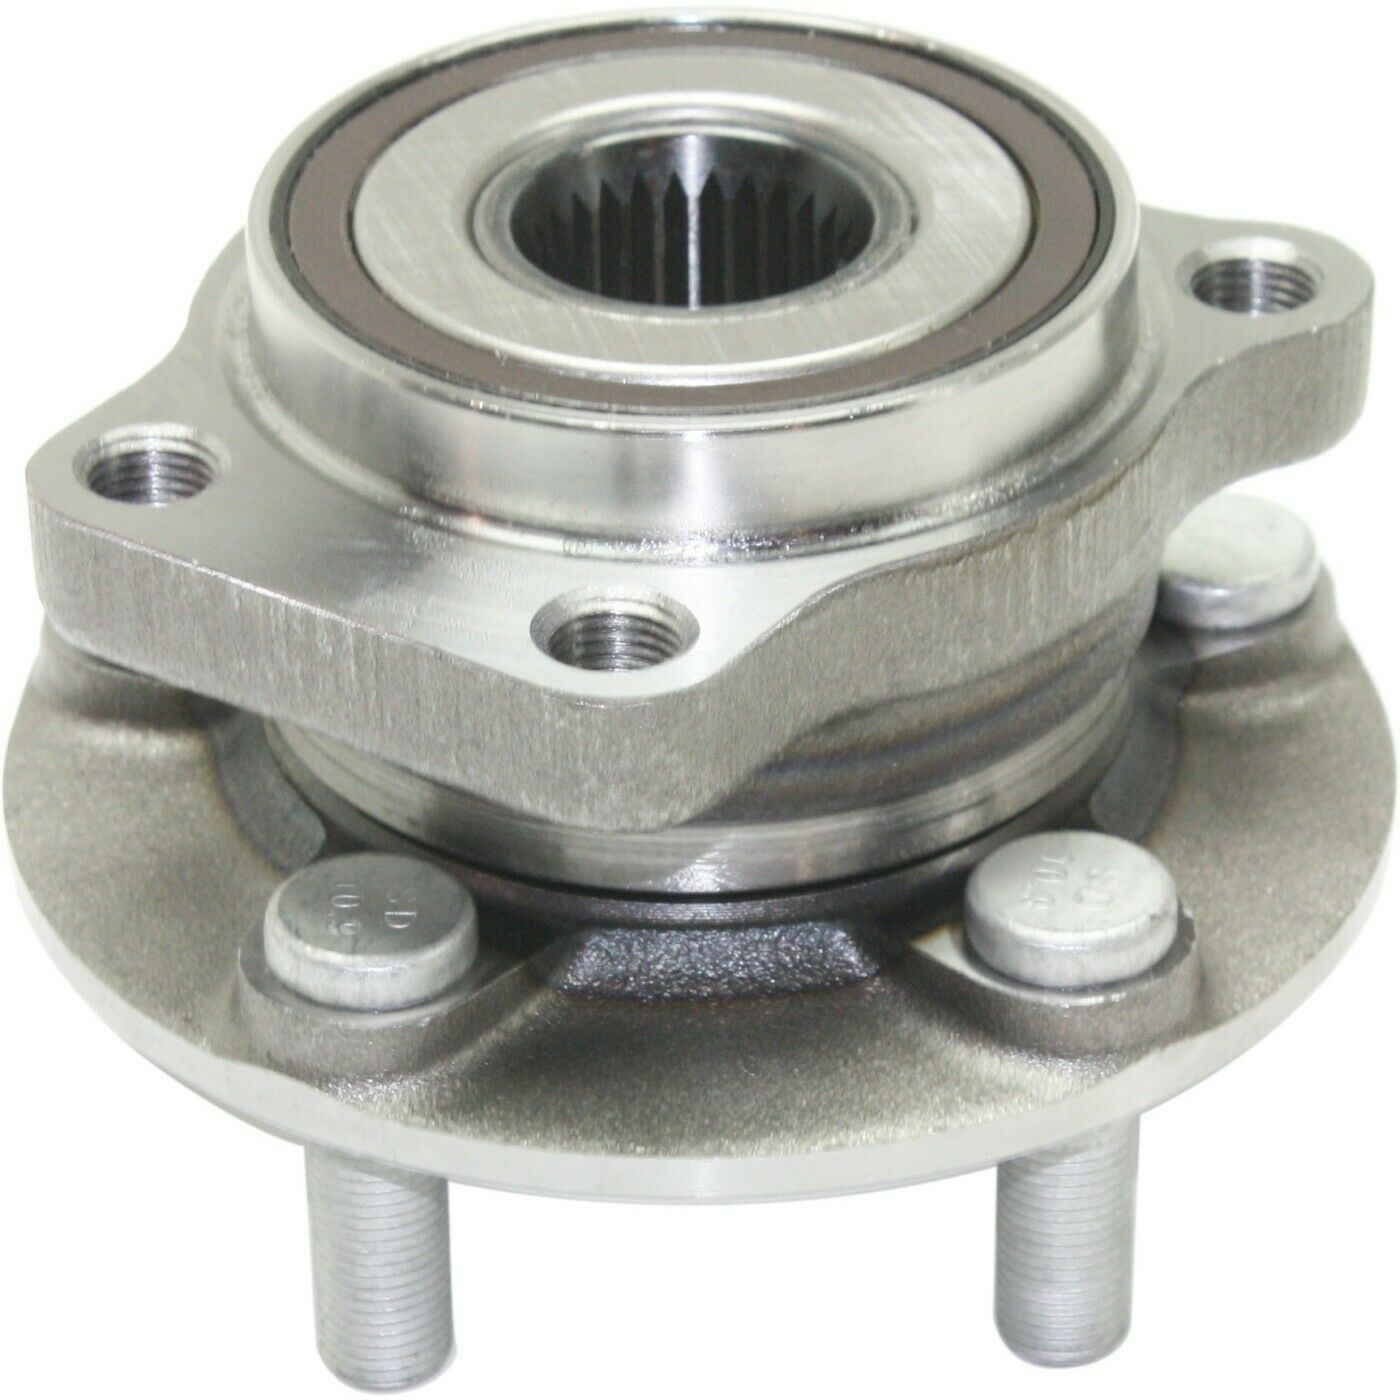 JADODE Front Wheel Hub Bearing Assembly For Subaru 2005-2014 Legacy/Outback  513303